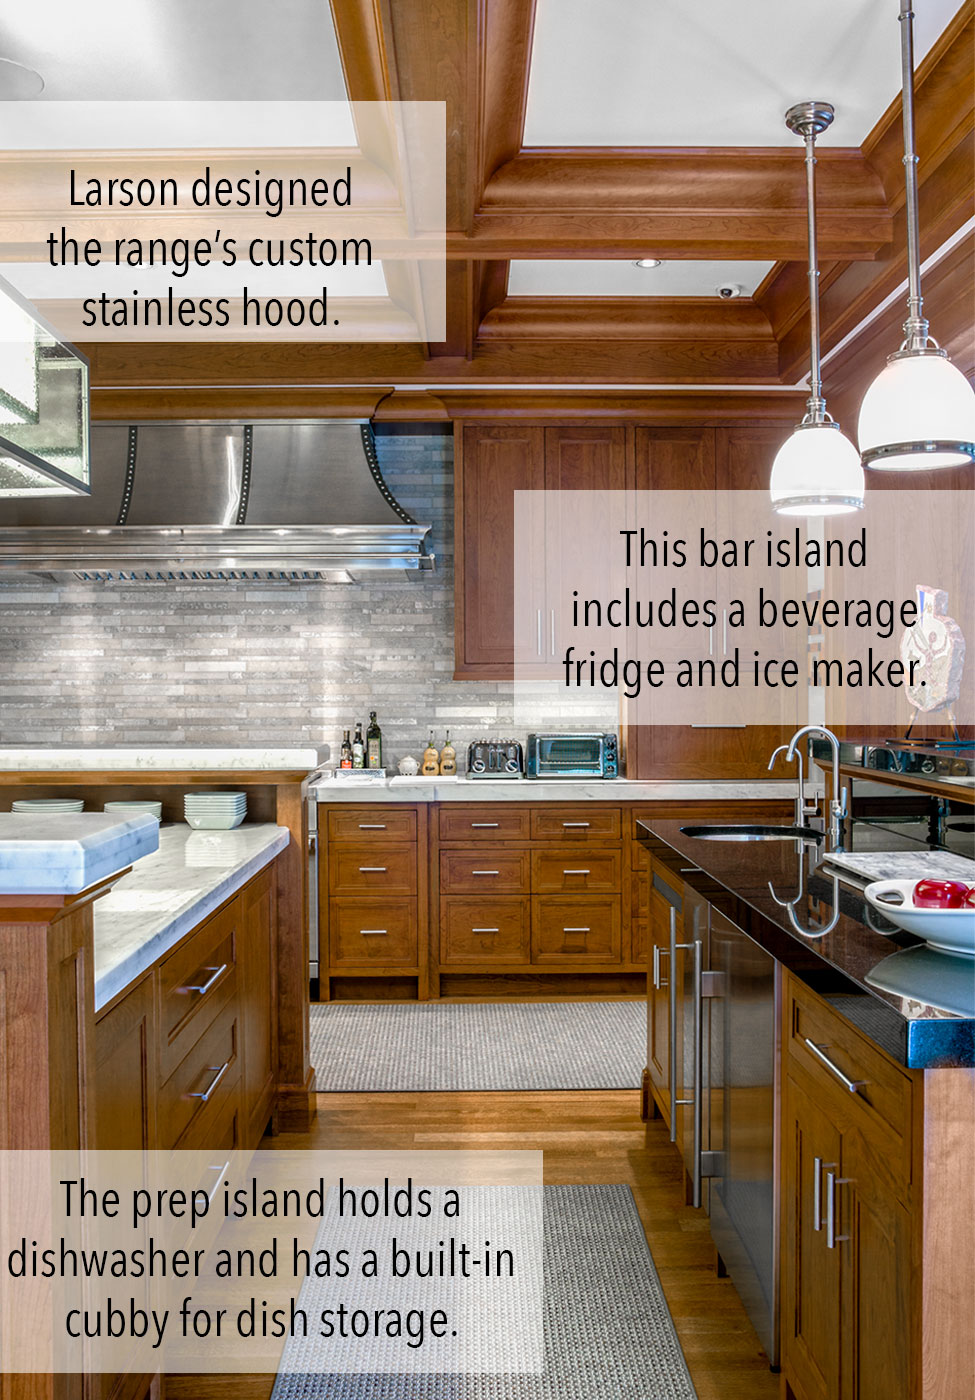 Custom kitchen with multiple islands and cherry woodwork by Fallon Custom Homes & Renovations